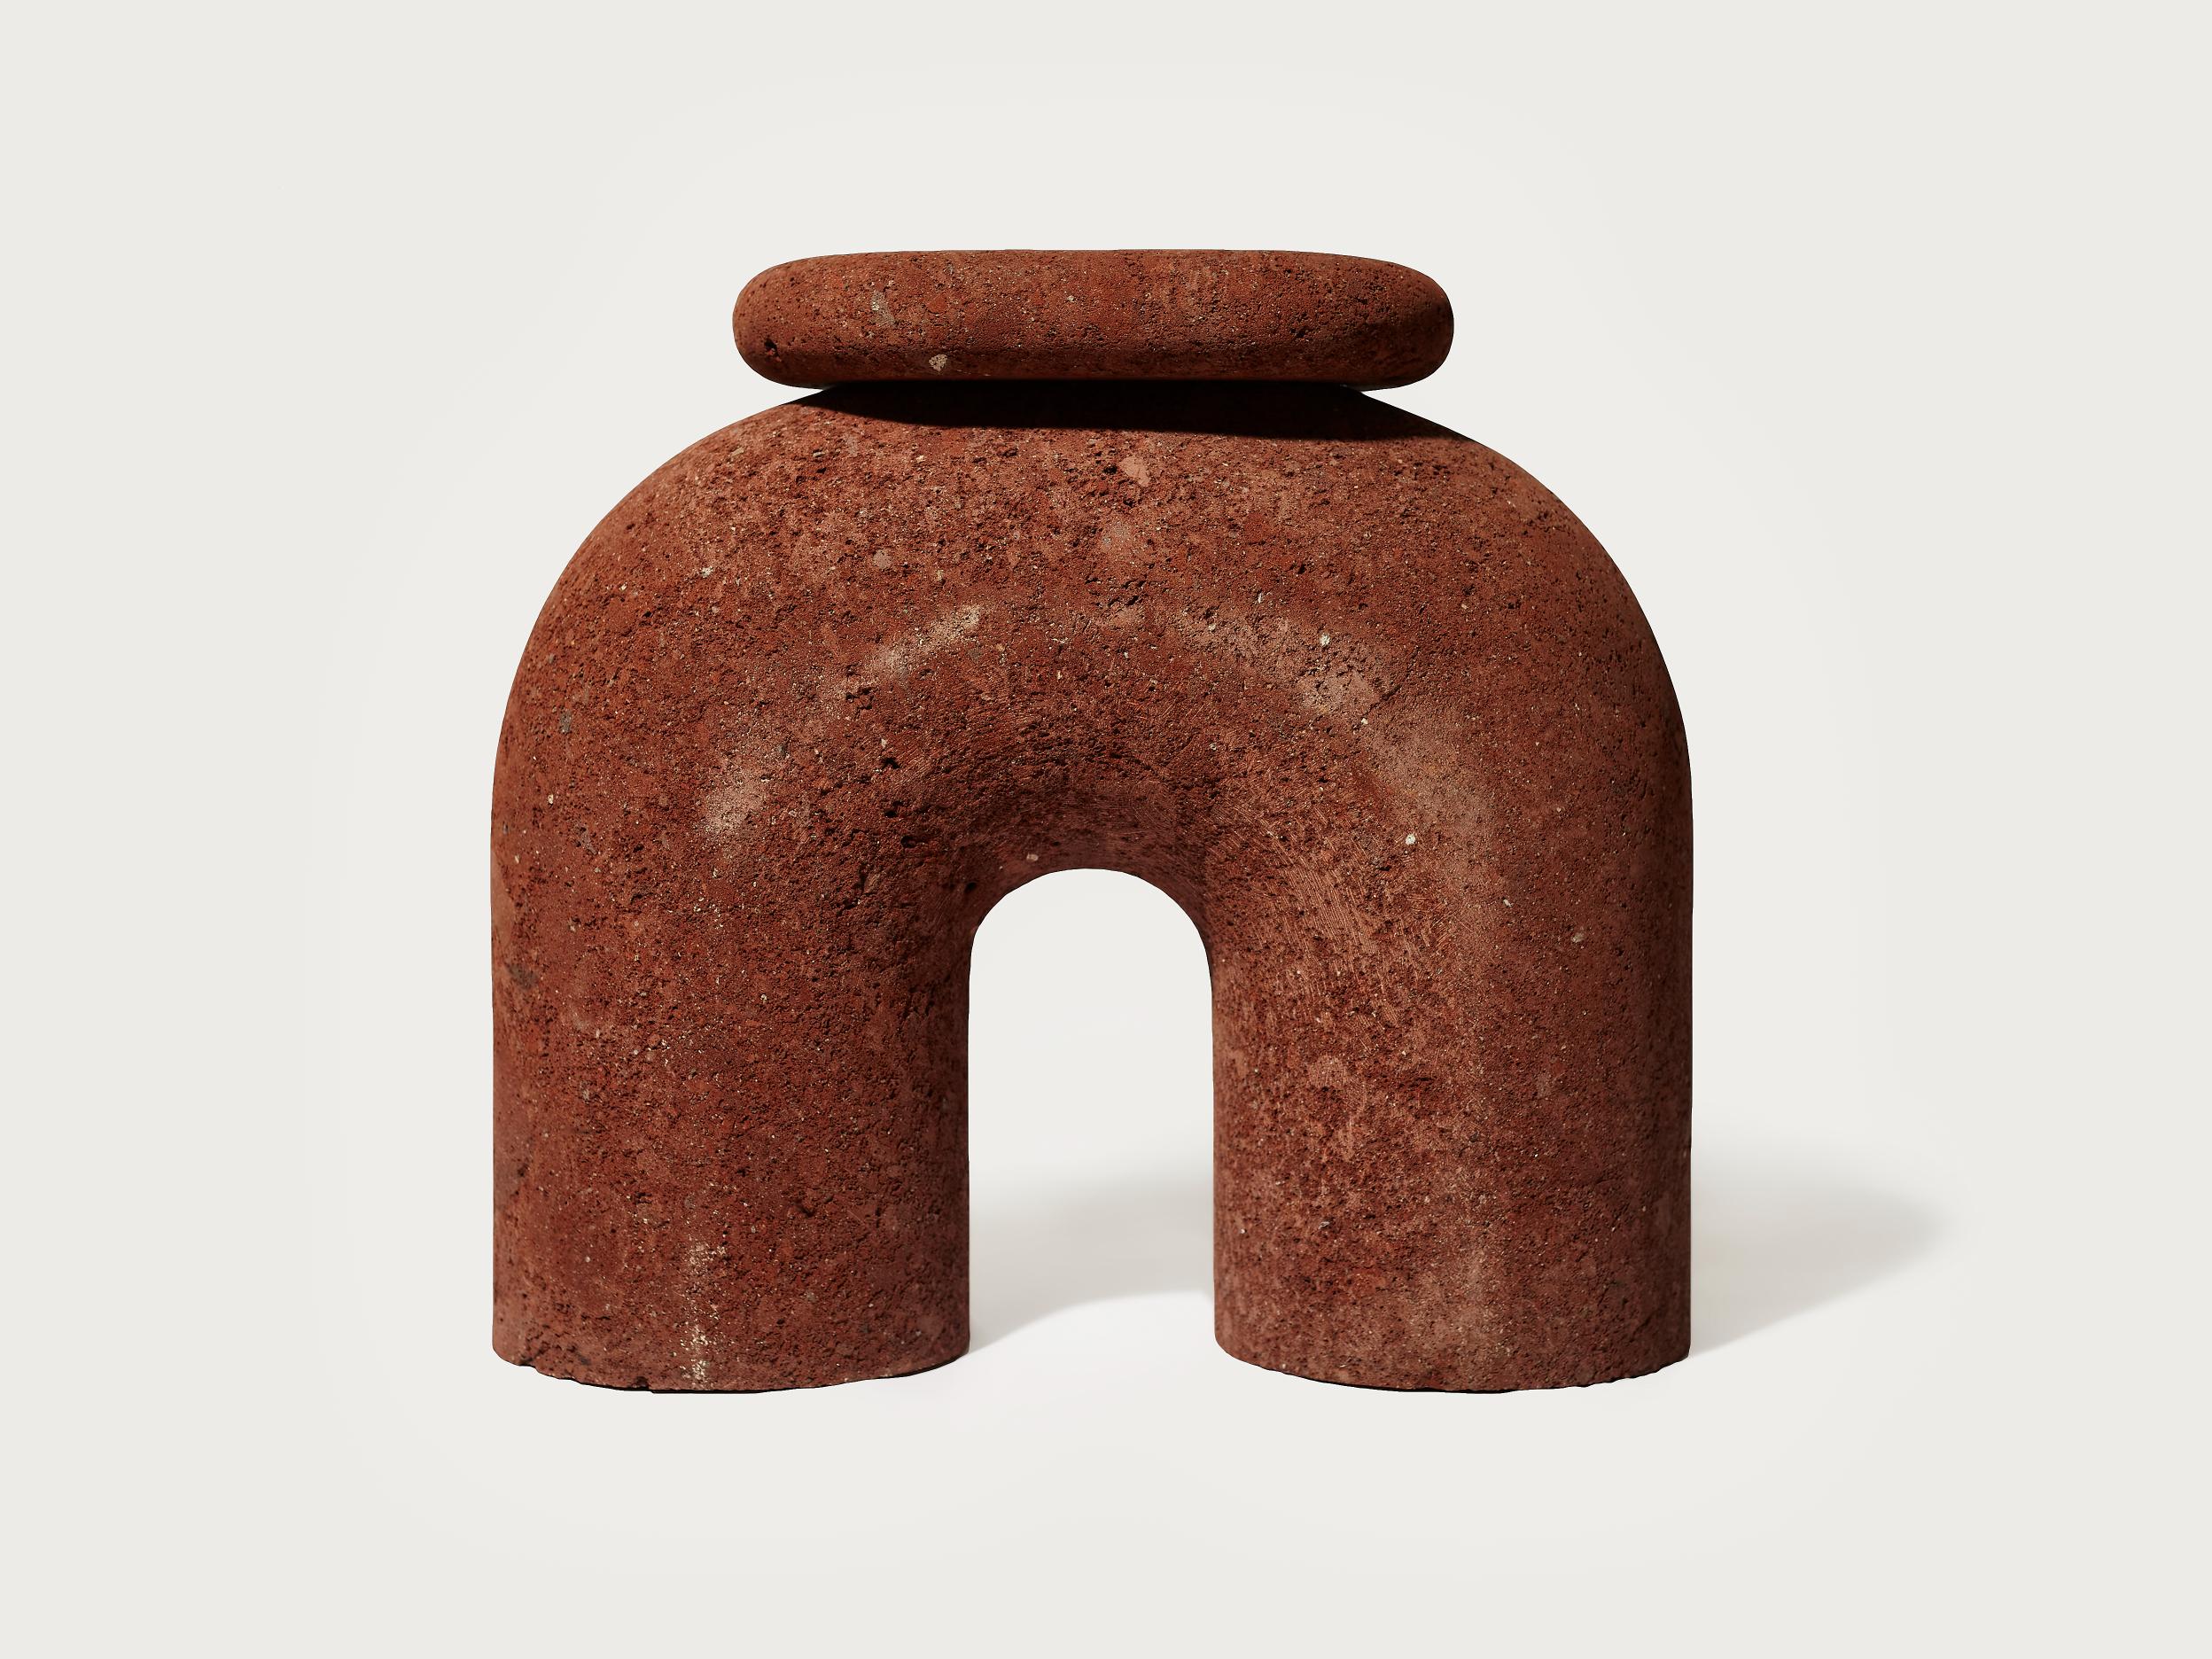 Neolithic thinker stool by Panorammma
Materials: tezontle (red volcanic rock). 
Dimensions: 45 x 50 x 20 cm.

Panorammma is a furniture design atelier based in Mexico City that seeks to redefine our relation to functional objects through